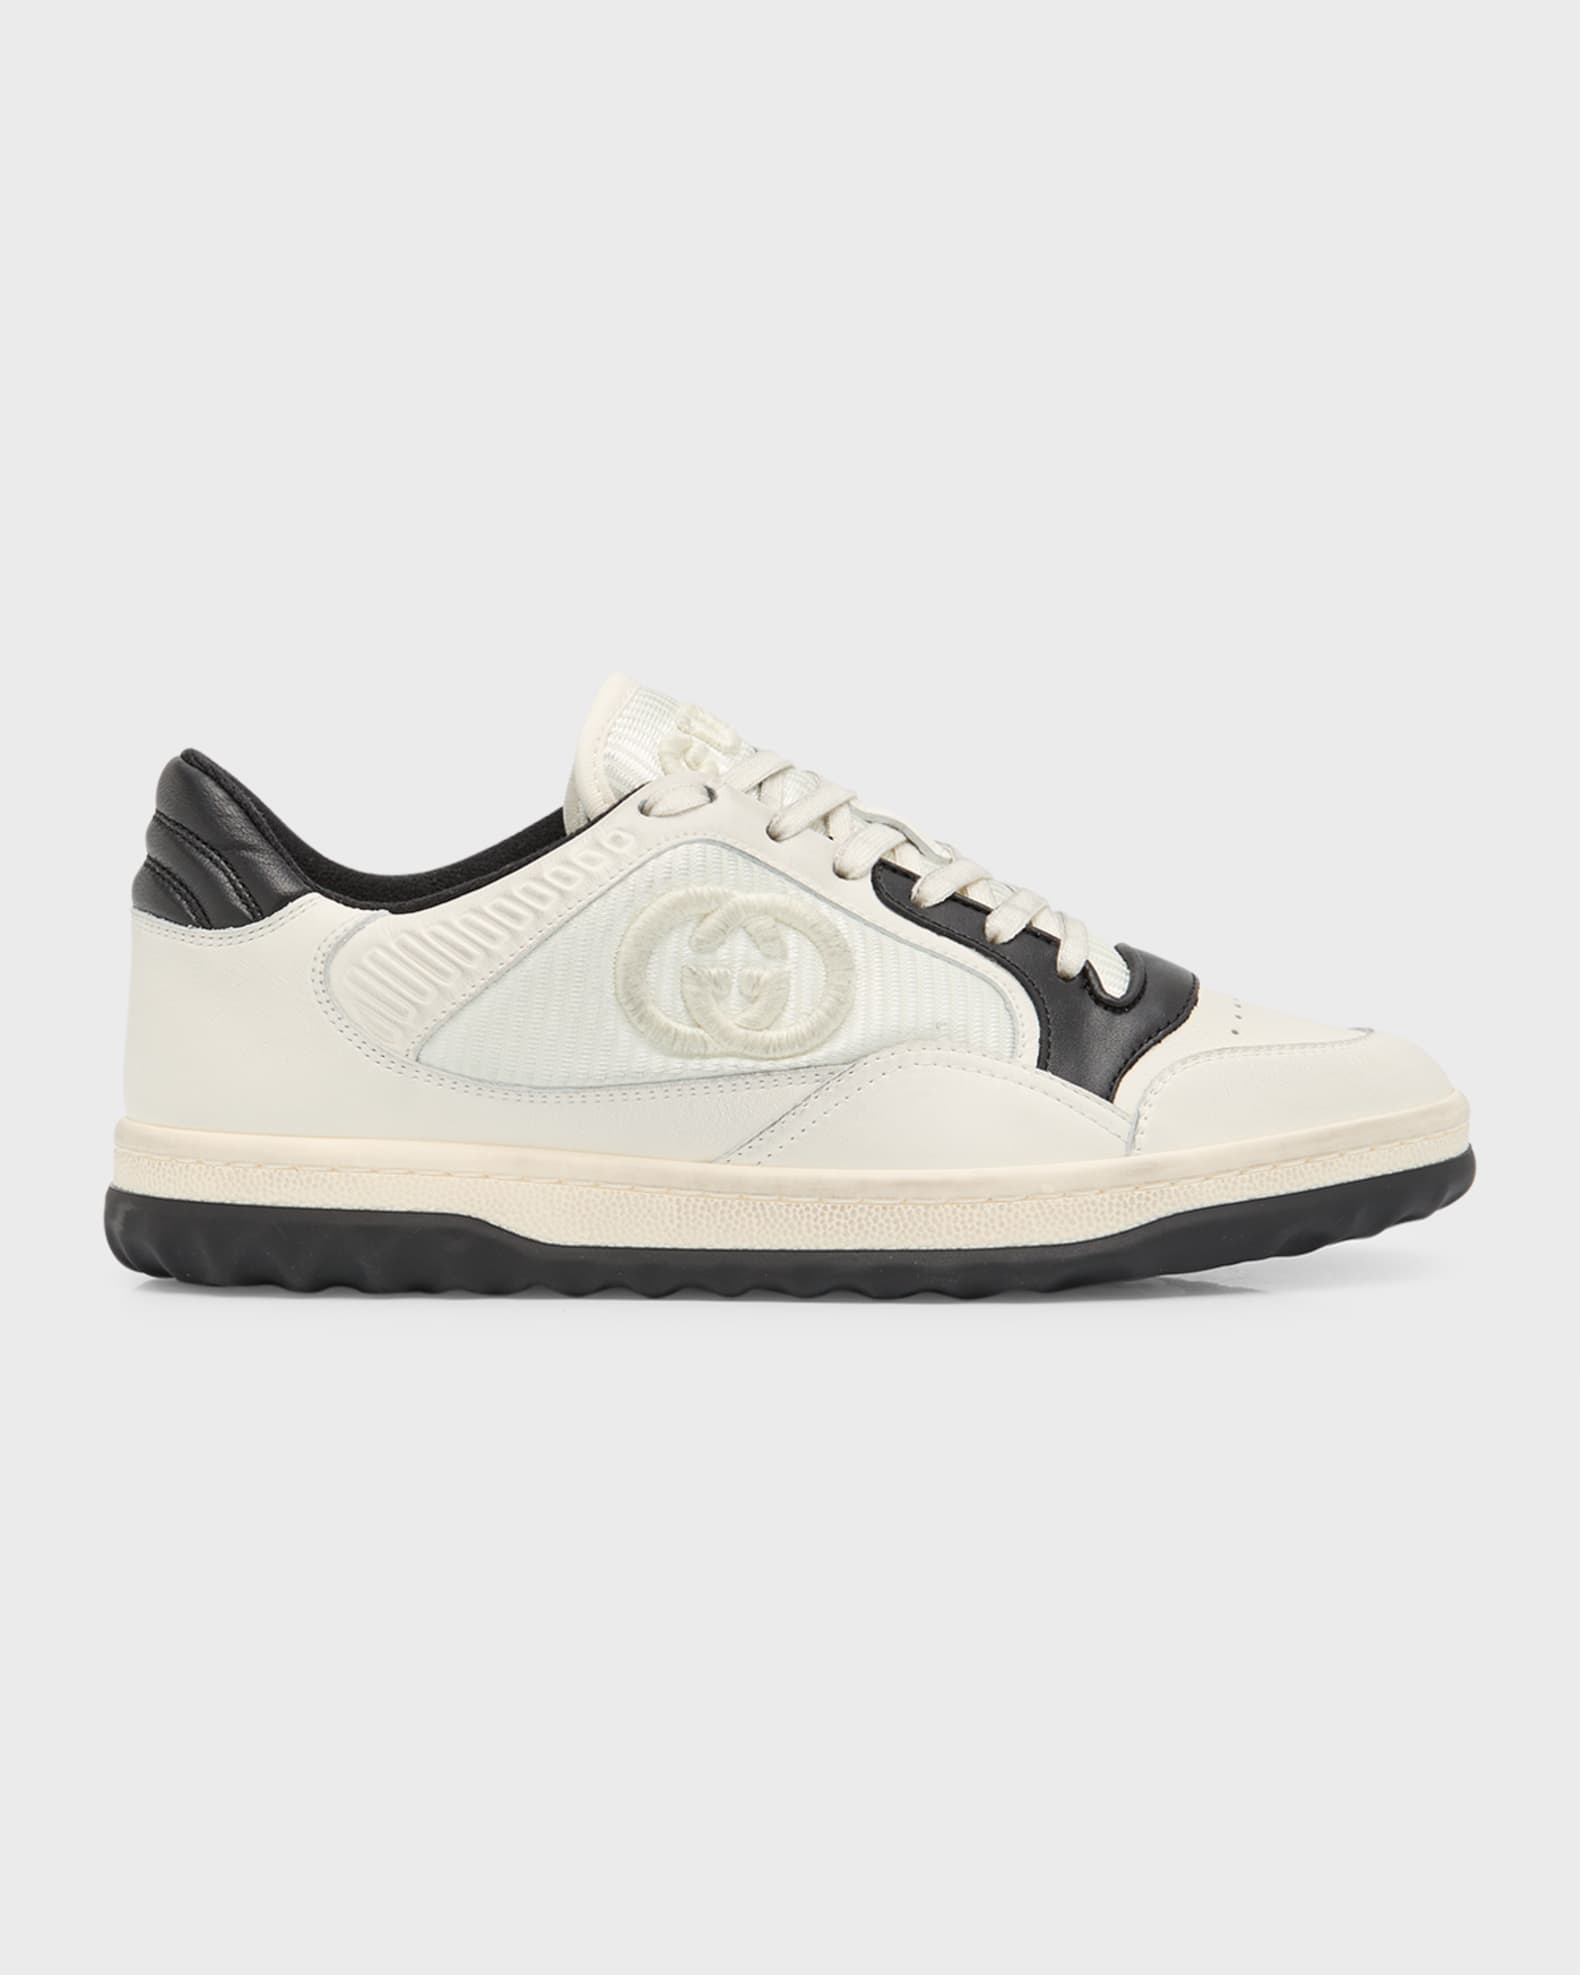 Gucci Bicolor Leather Low-Top Sneakers | Neiman Marcus